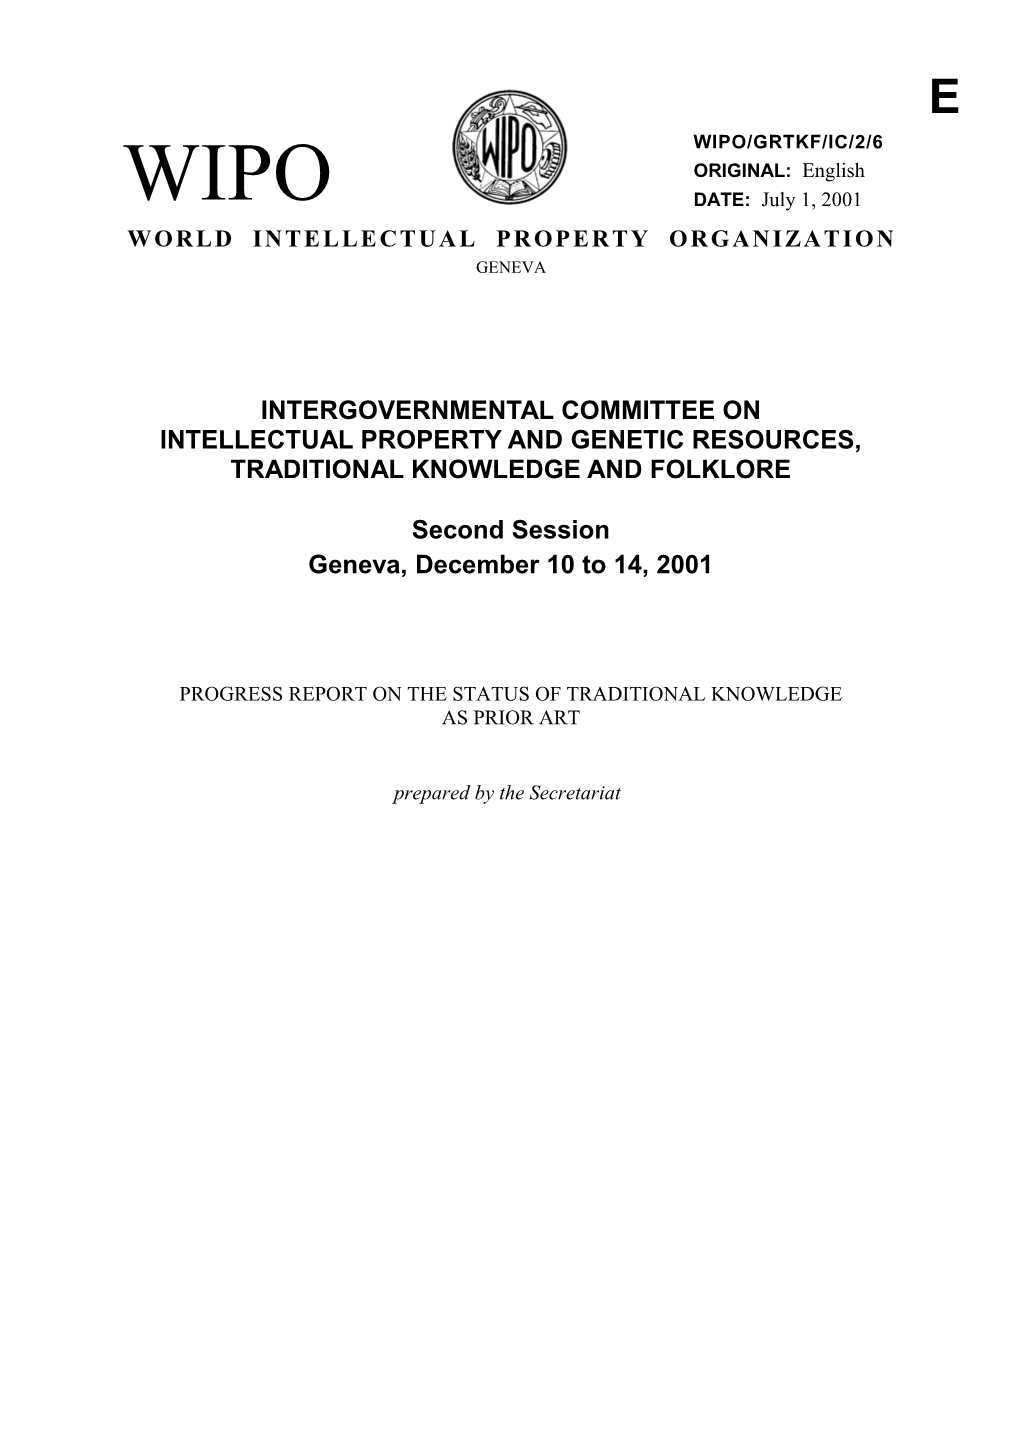 WIPO/GRTKF/IC/2/6: Progress Report on the Status of Traditional Knowledge As Prior Art